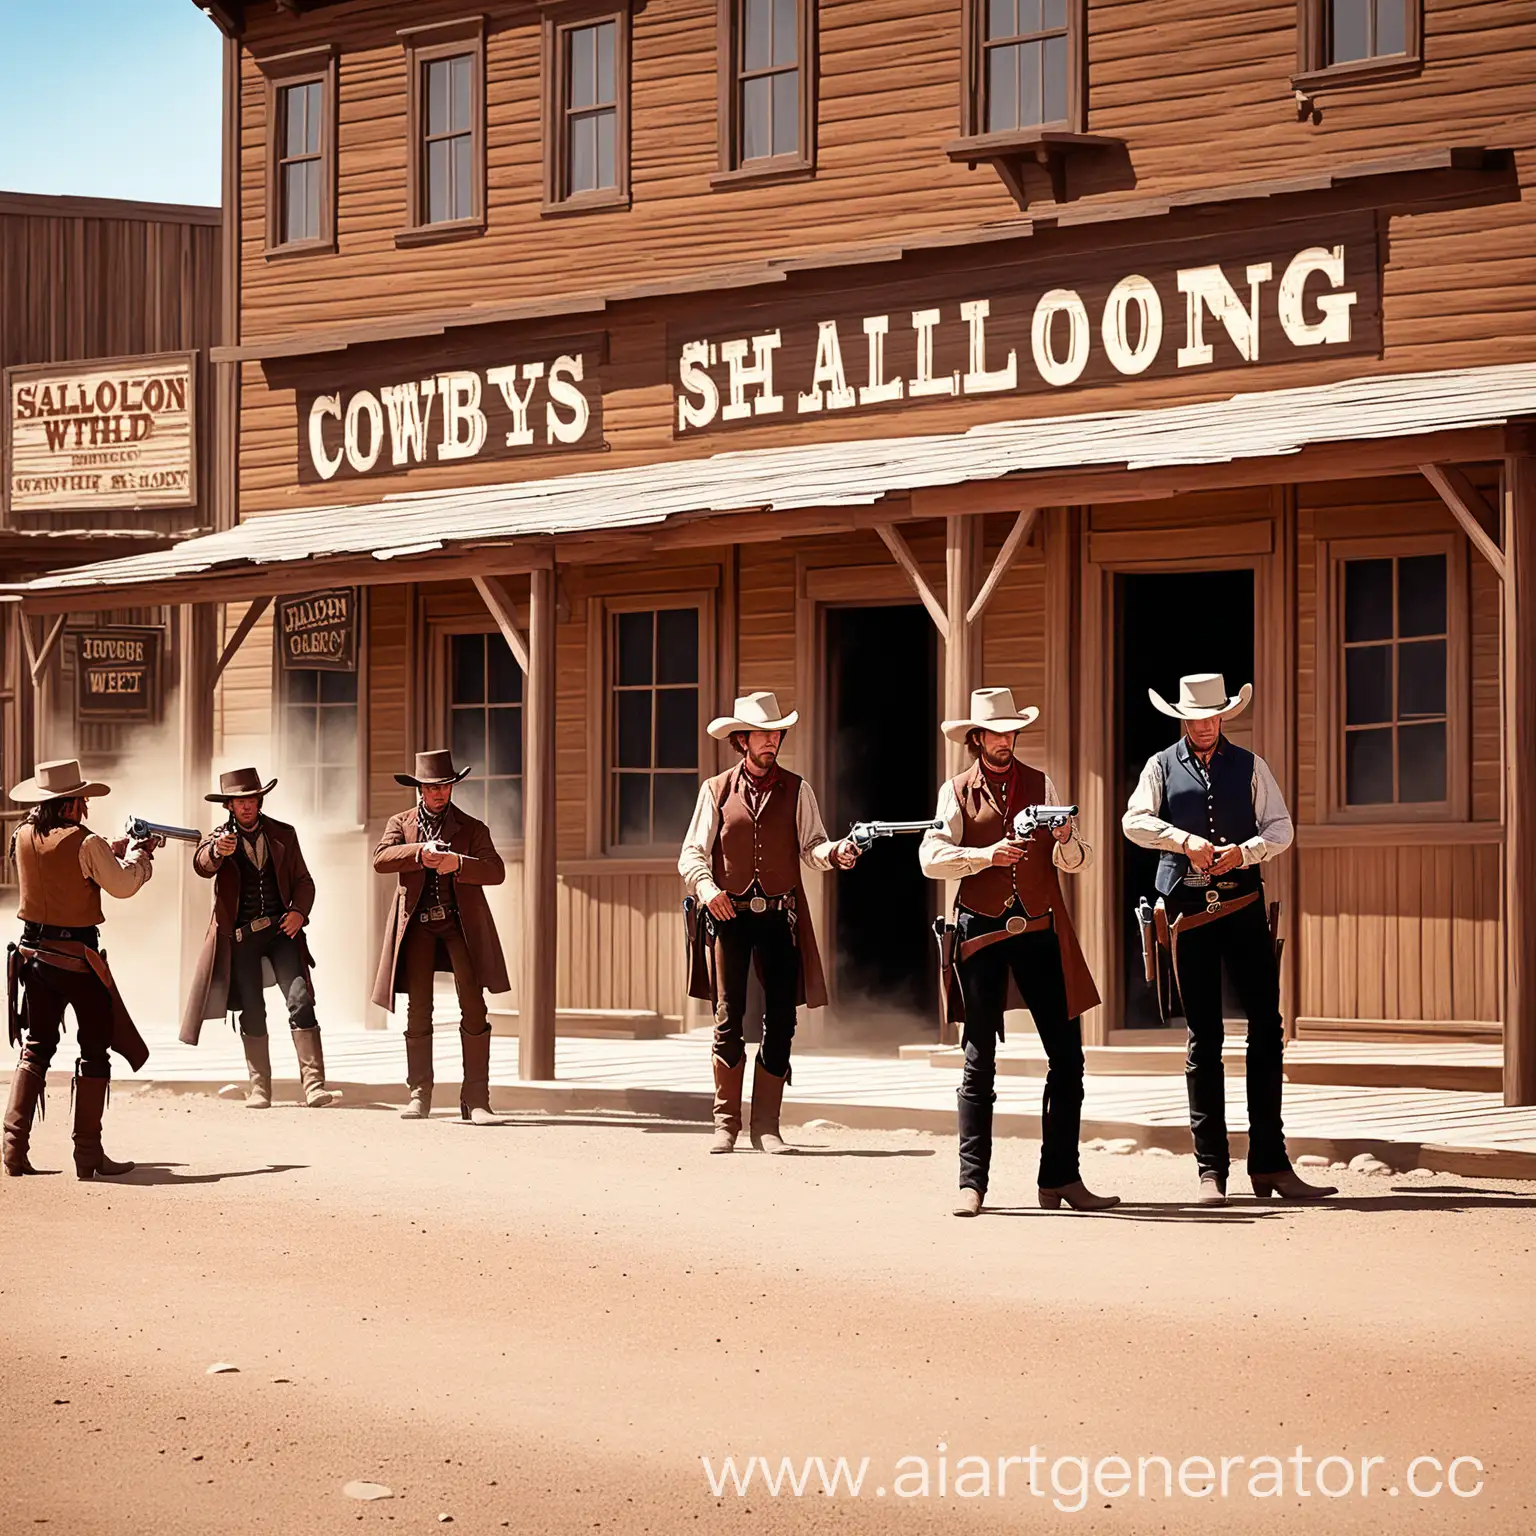 Wild-West-Cowboys-Engage-in-Street-Shootout-Near-Saloon